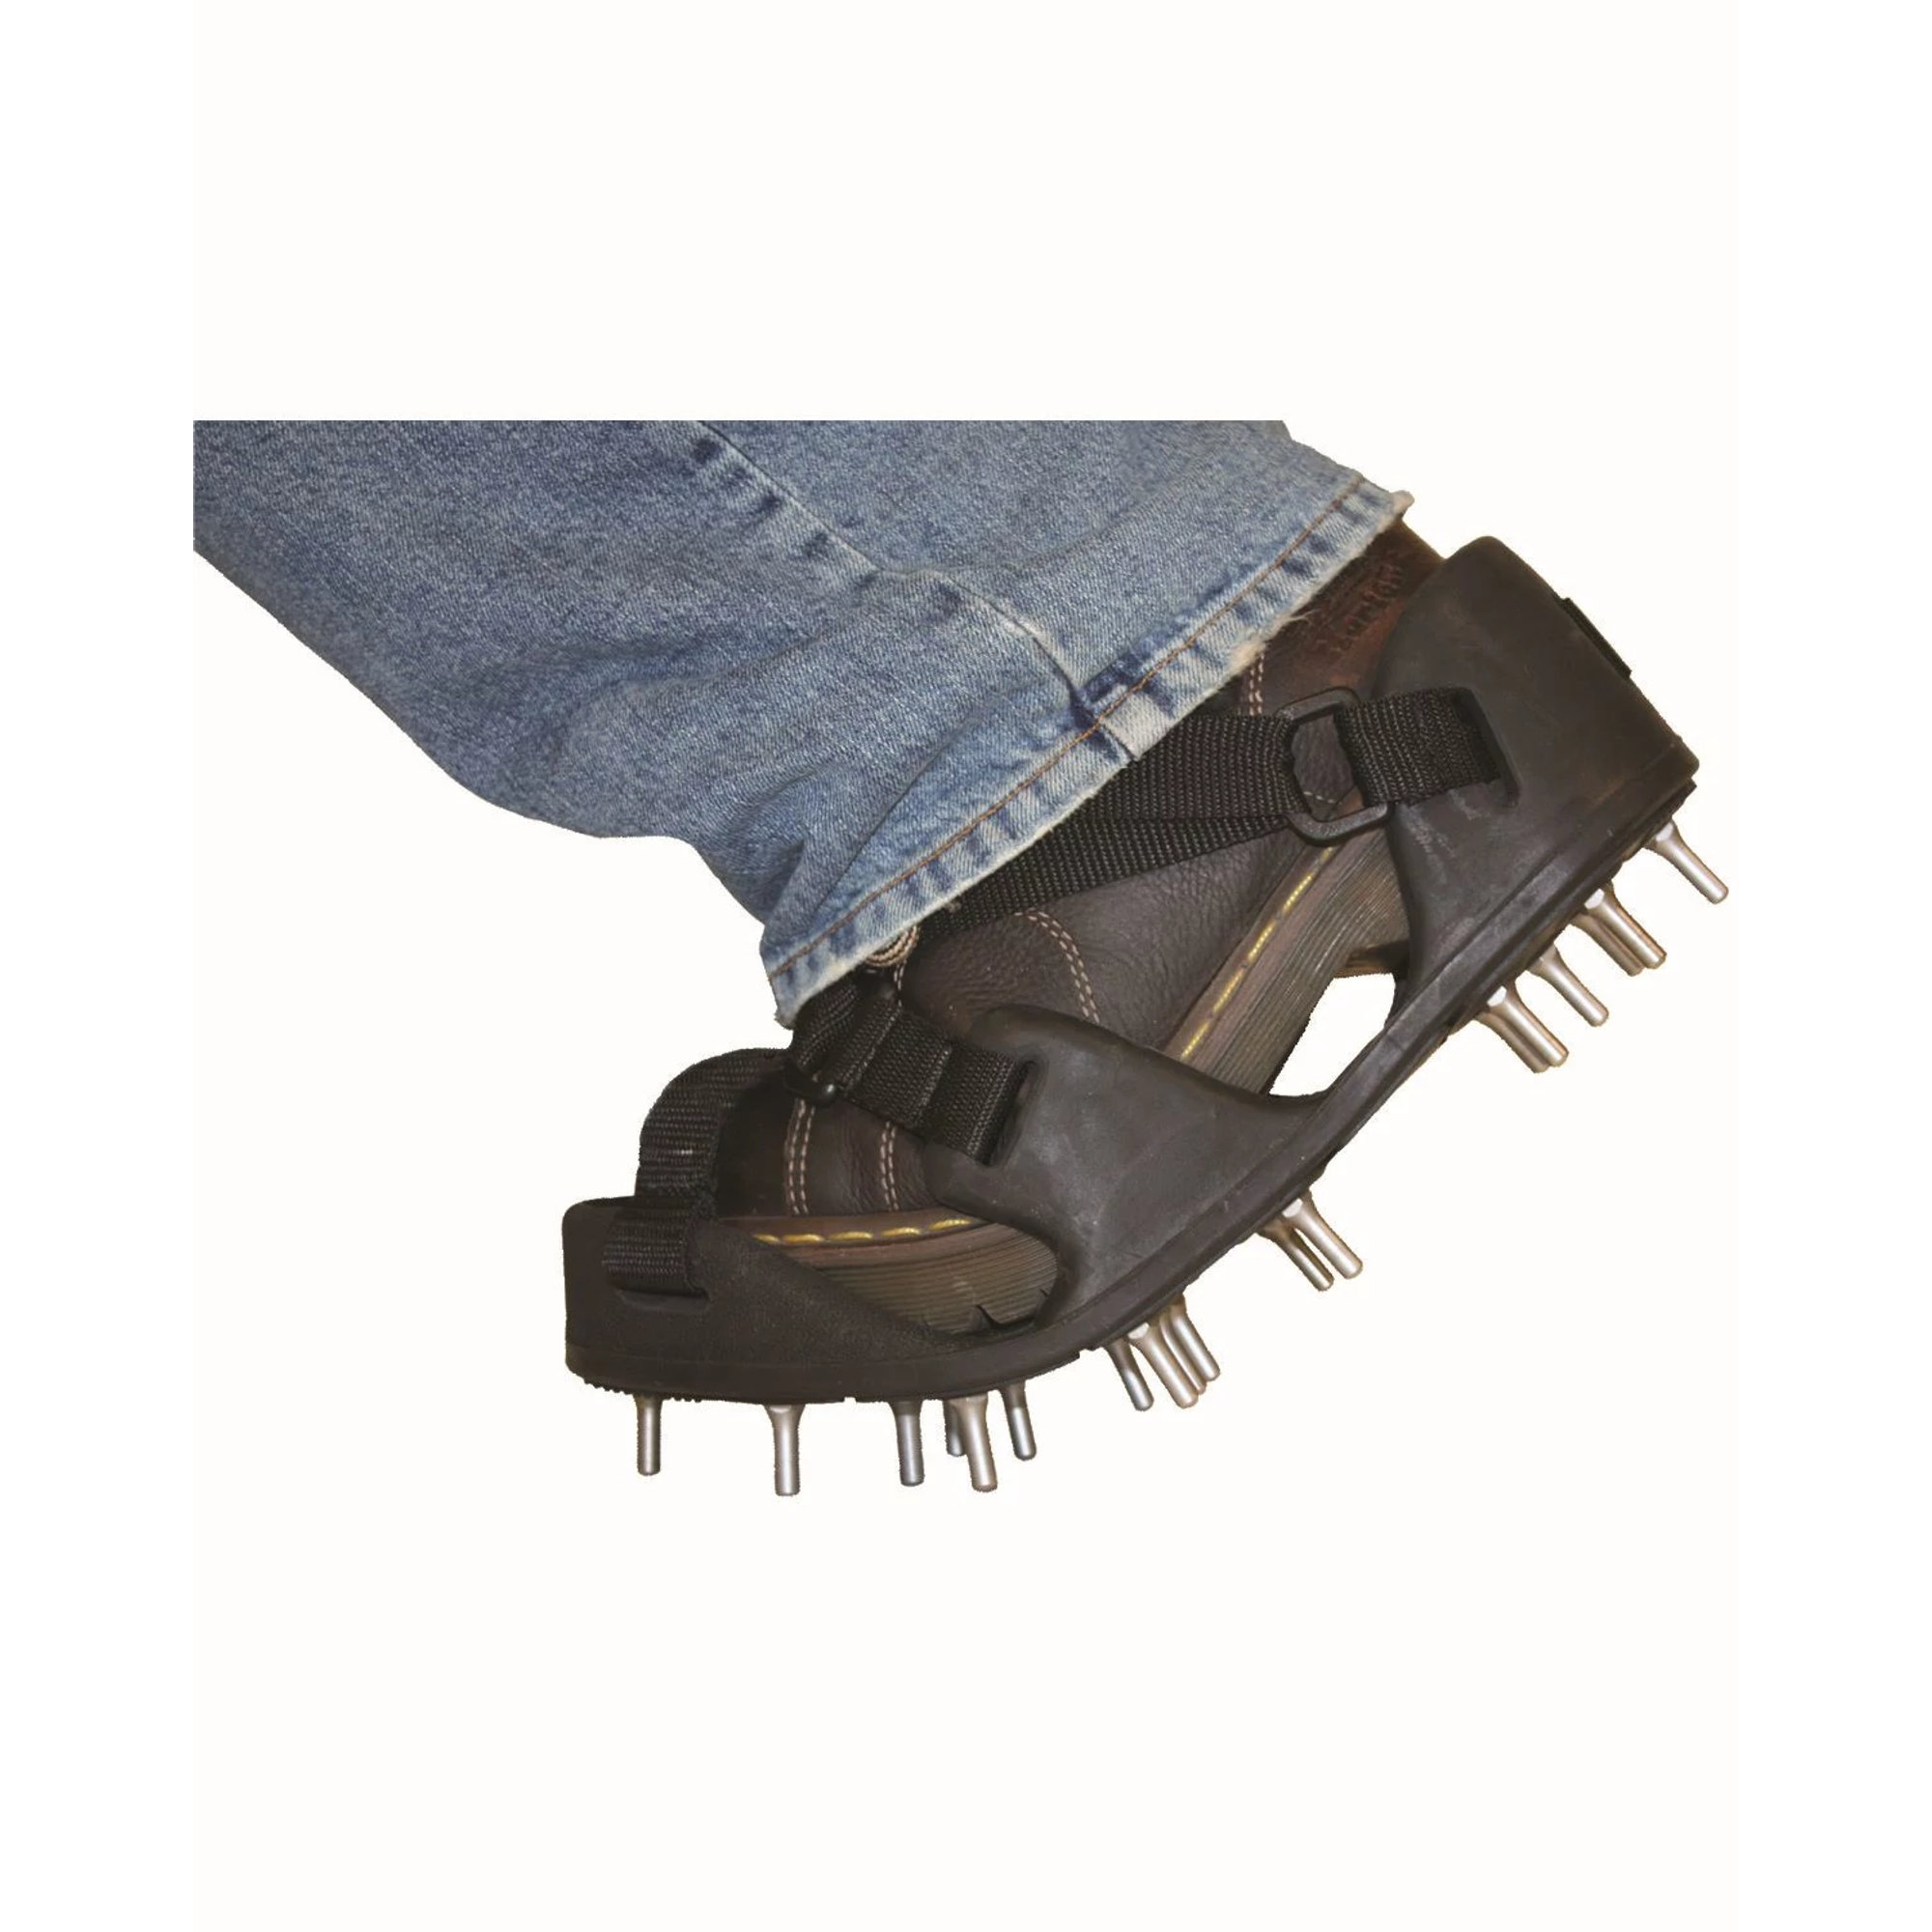 Shoe-In Spiked Shoes